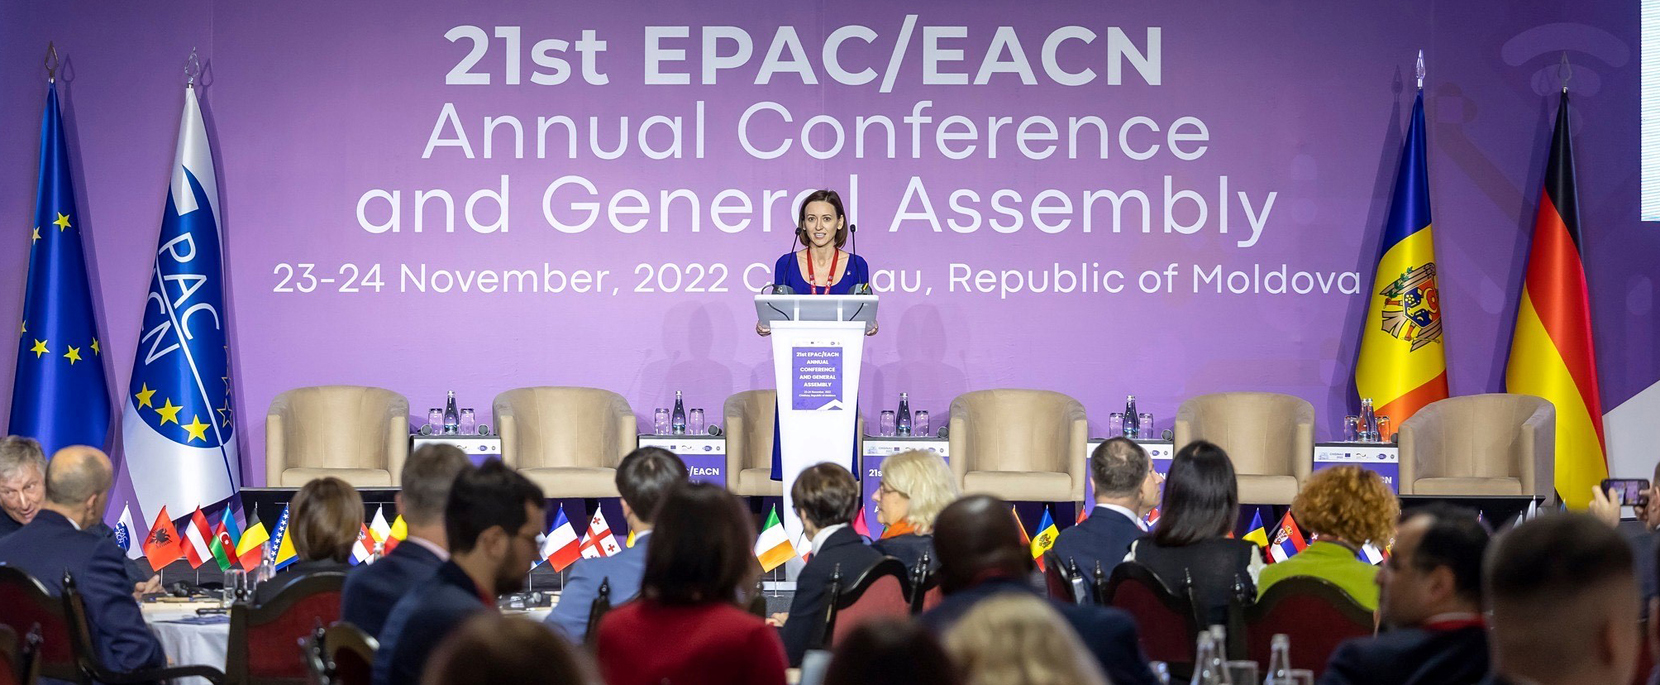 Veronica Dragalin at 21st EPAC/EACN Annual Conference and General Assembly 